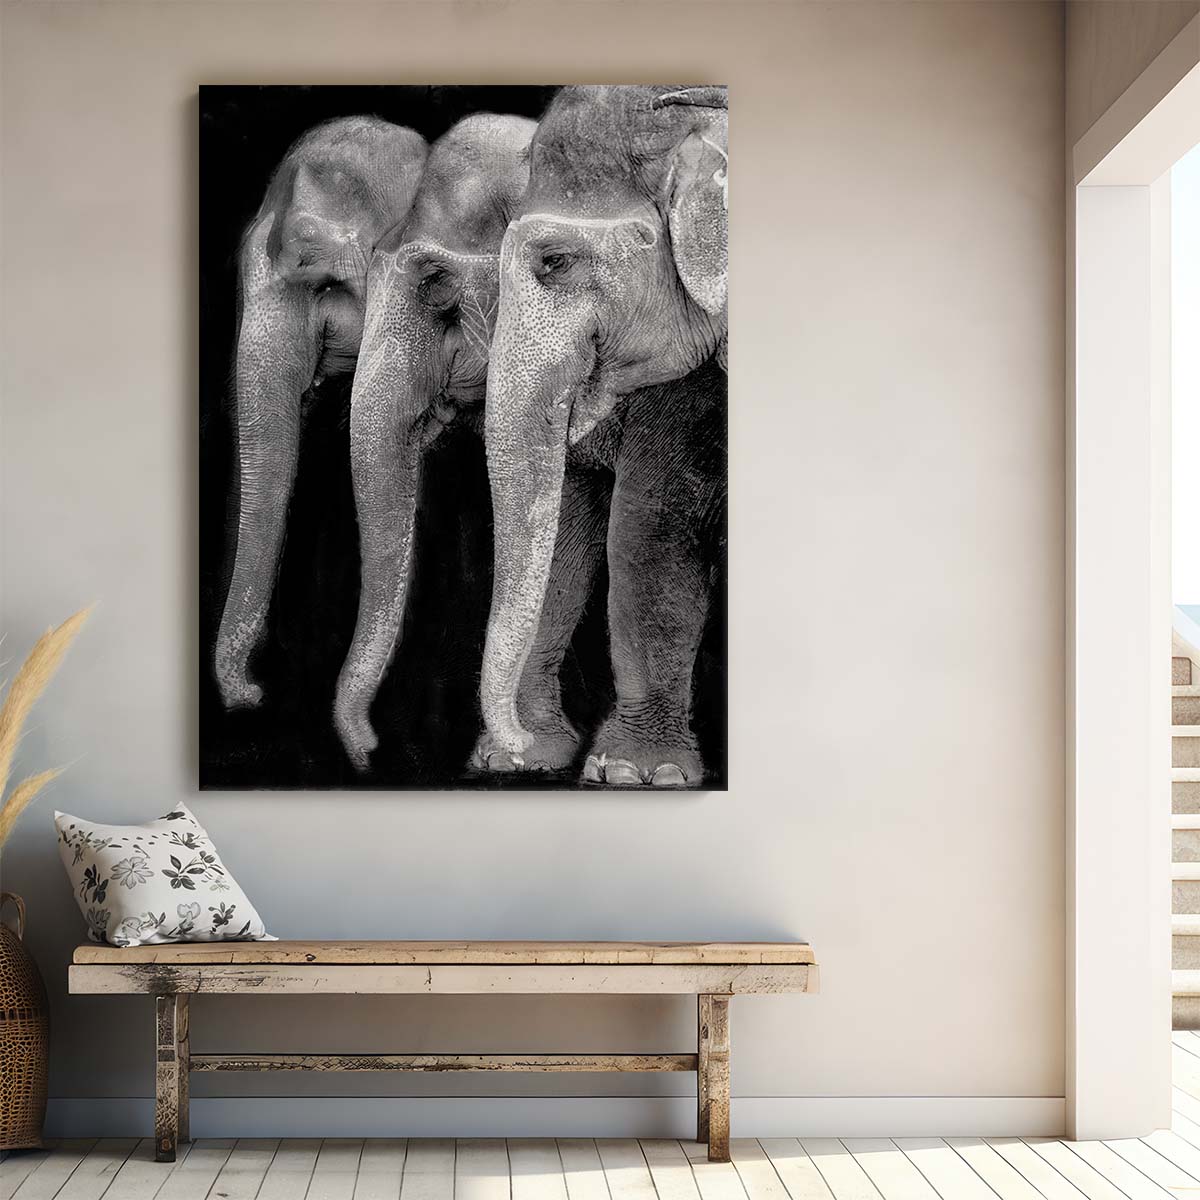 Majestic Monochrome Nepal Elephants Photography Wall Art by Luxuriance Designs, made in USA